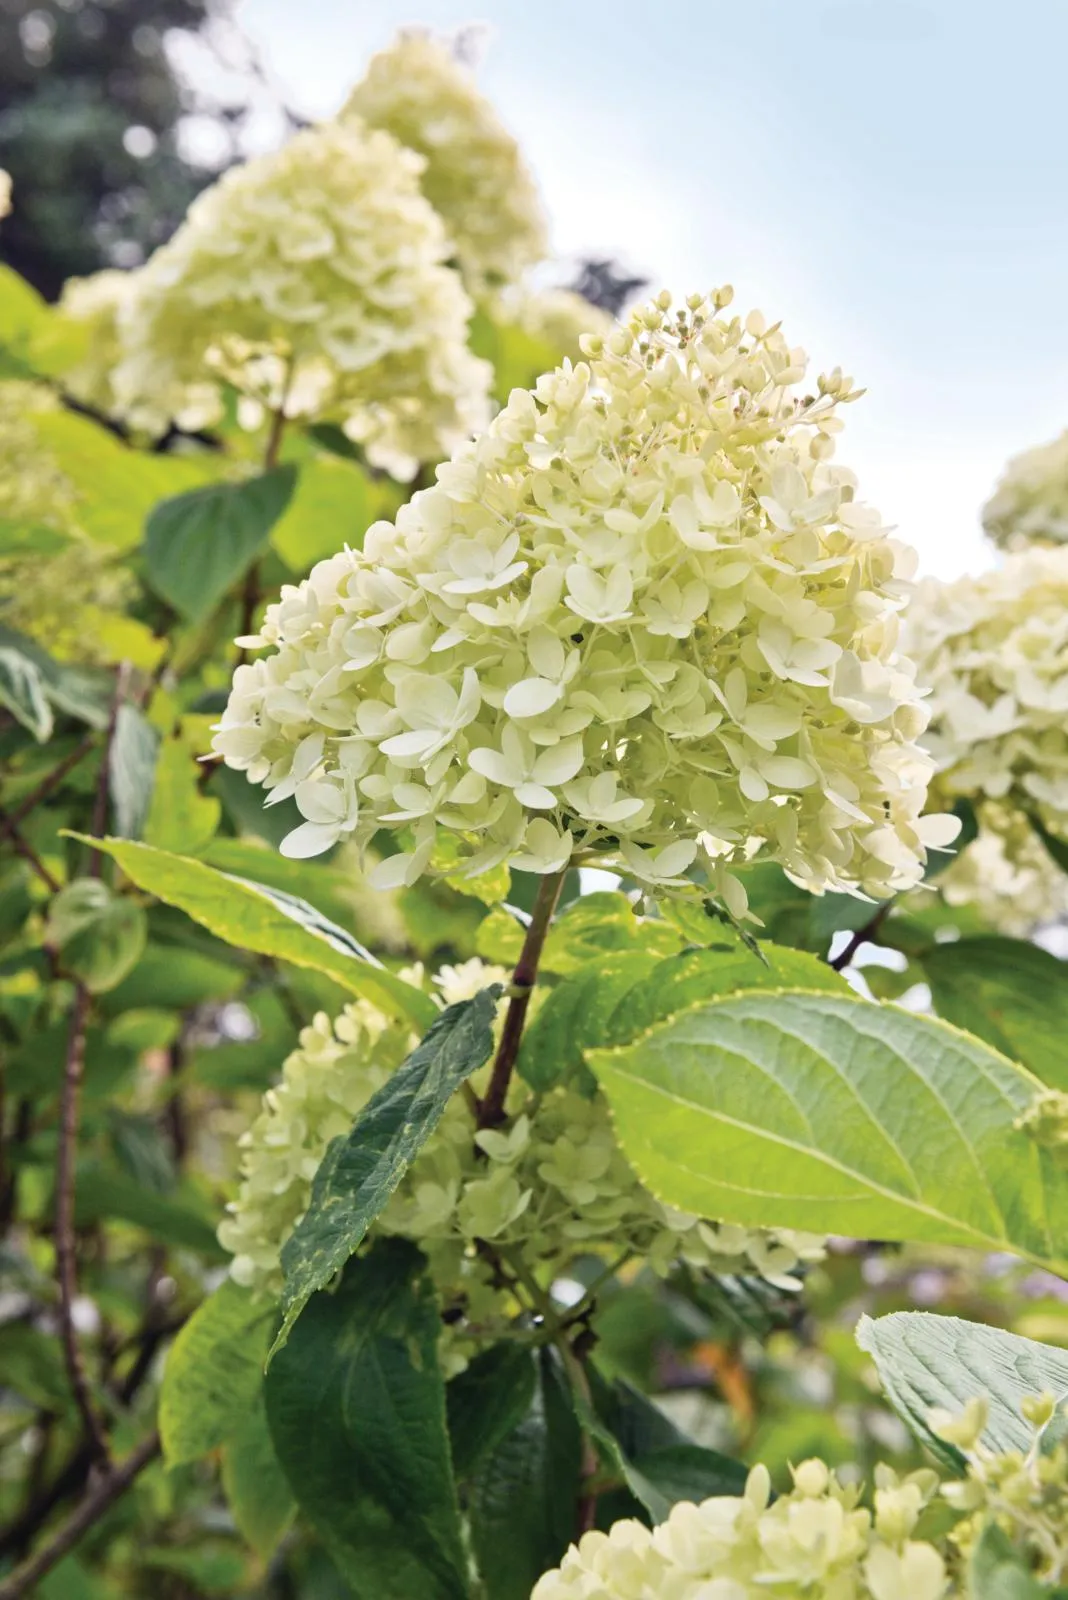 Hydrangea paniculata ‘Limelight' has is an upright variation with large conical heads of sterile florets in soft, lime-green, becoming white and eventually green flushed pink.